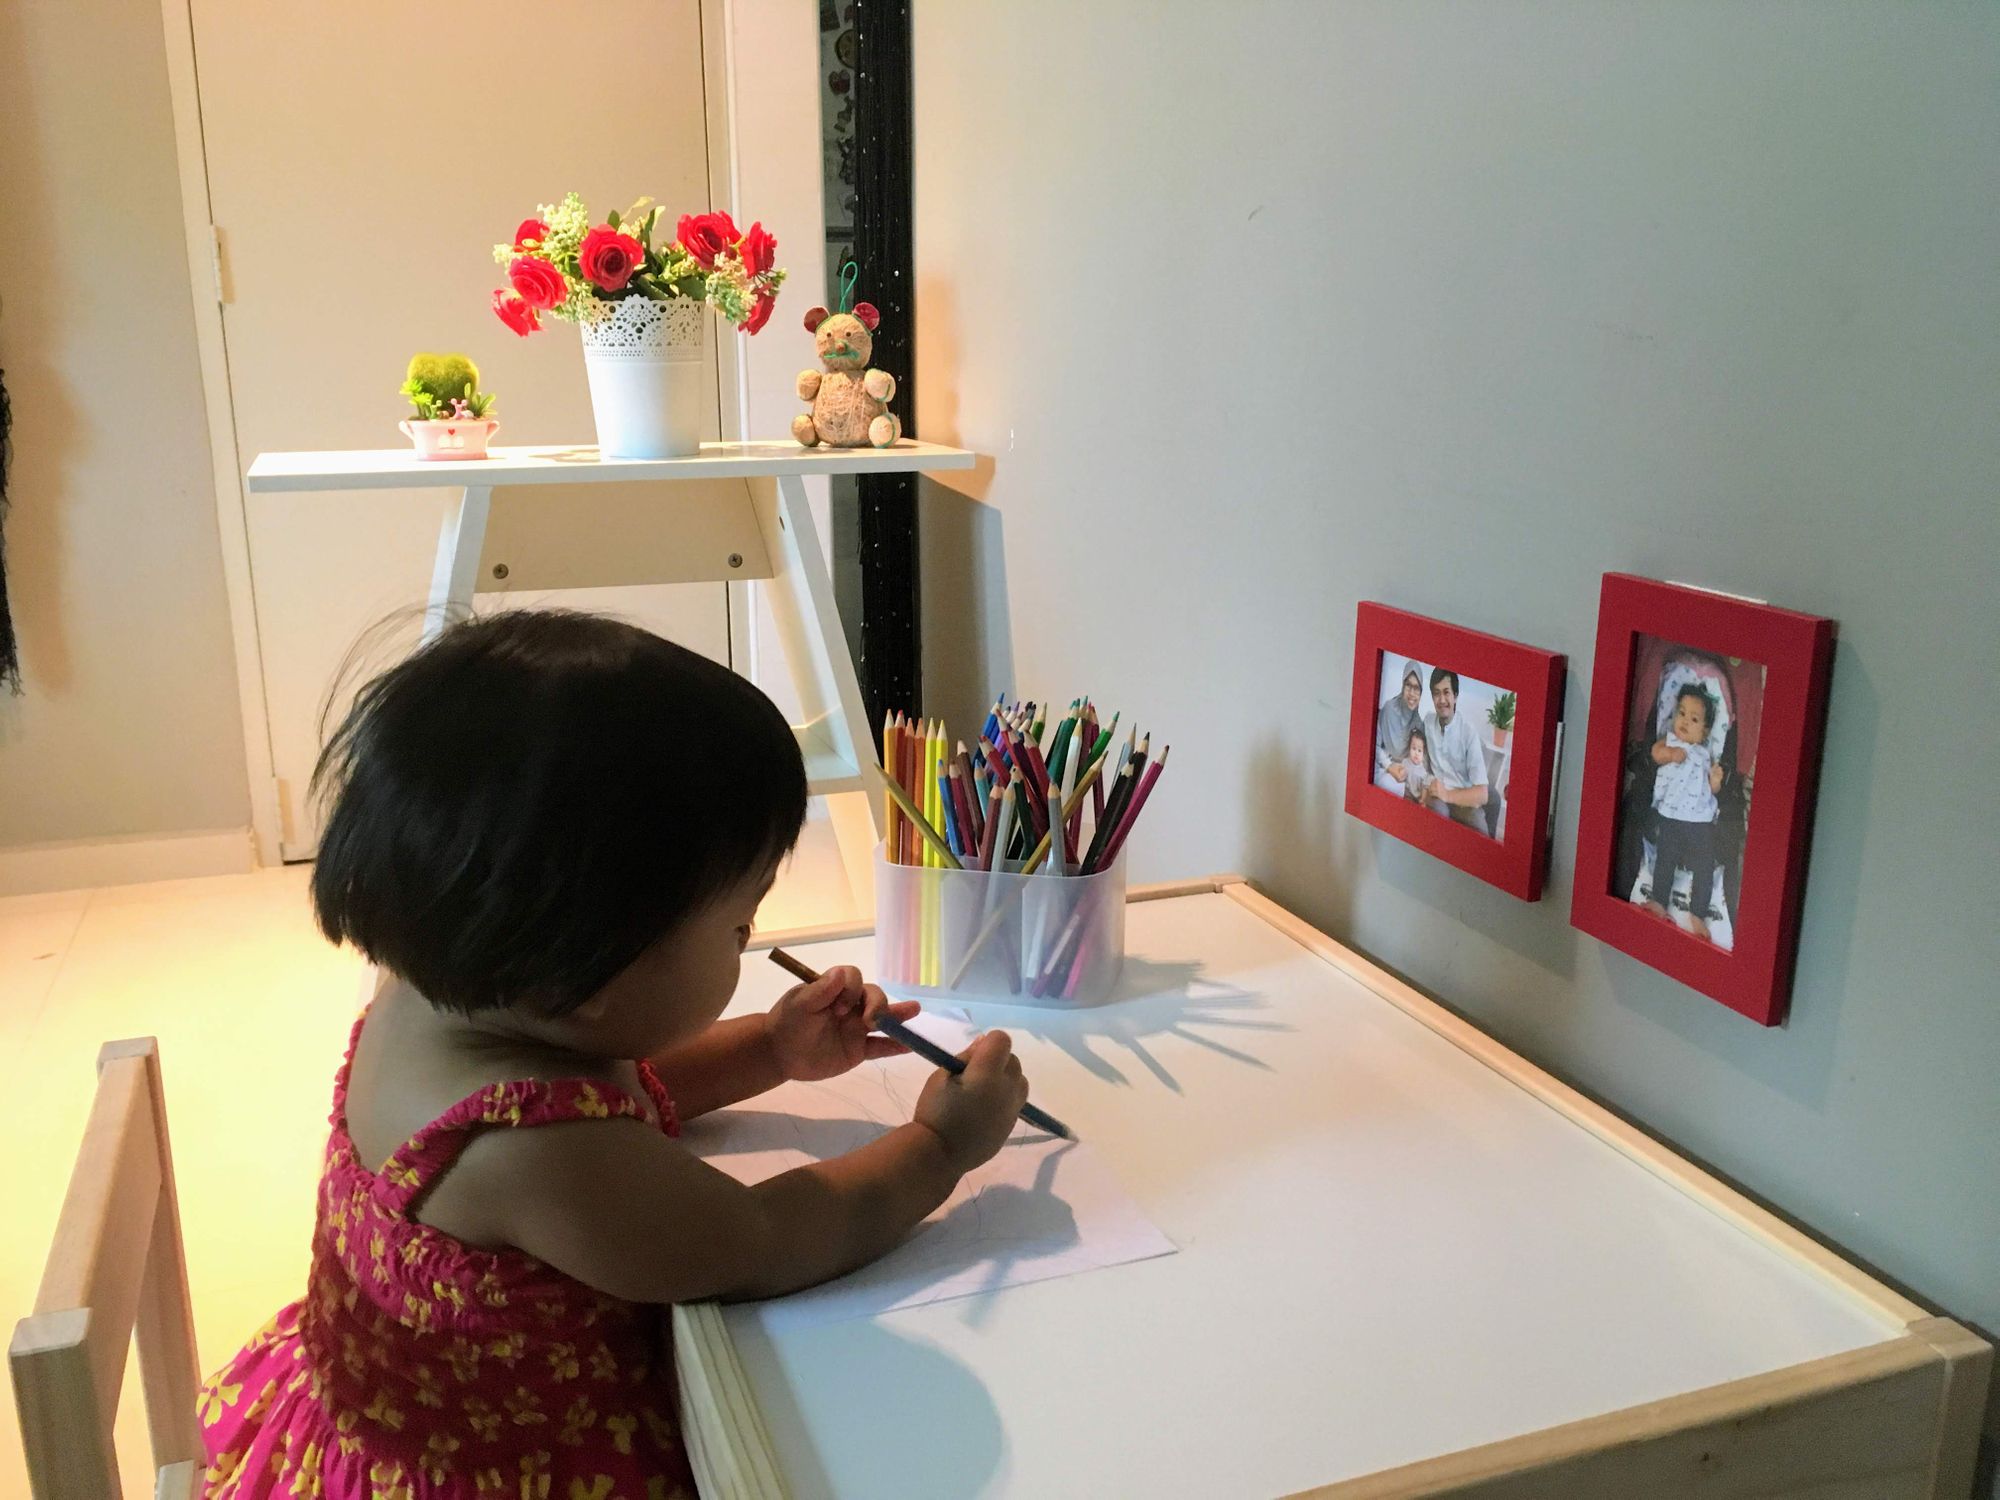 A New Set Up: Starting Our Montessori Journey